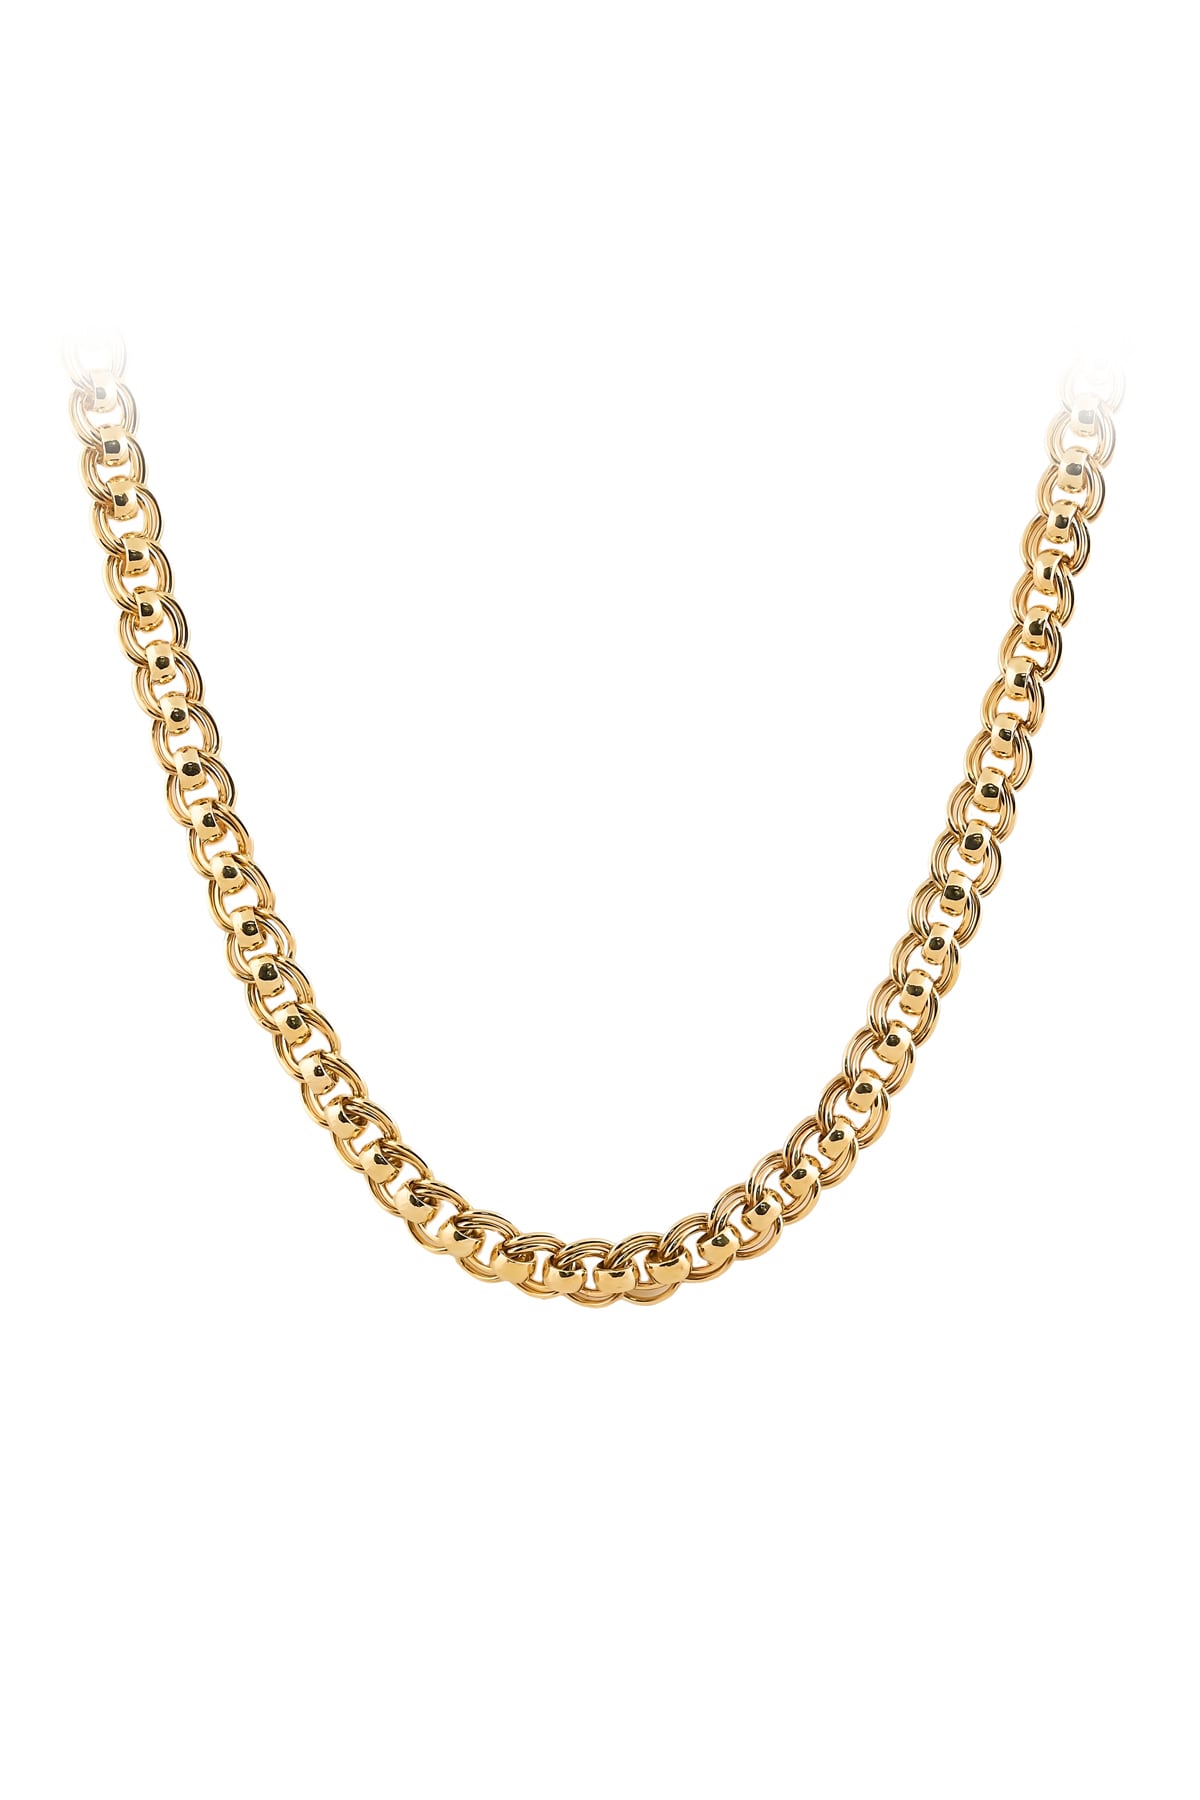 Solid 9 Carat Yellow Gold Roller Necklet from LeGassick Jewellery.